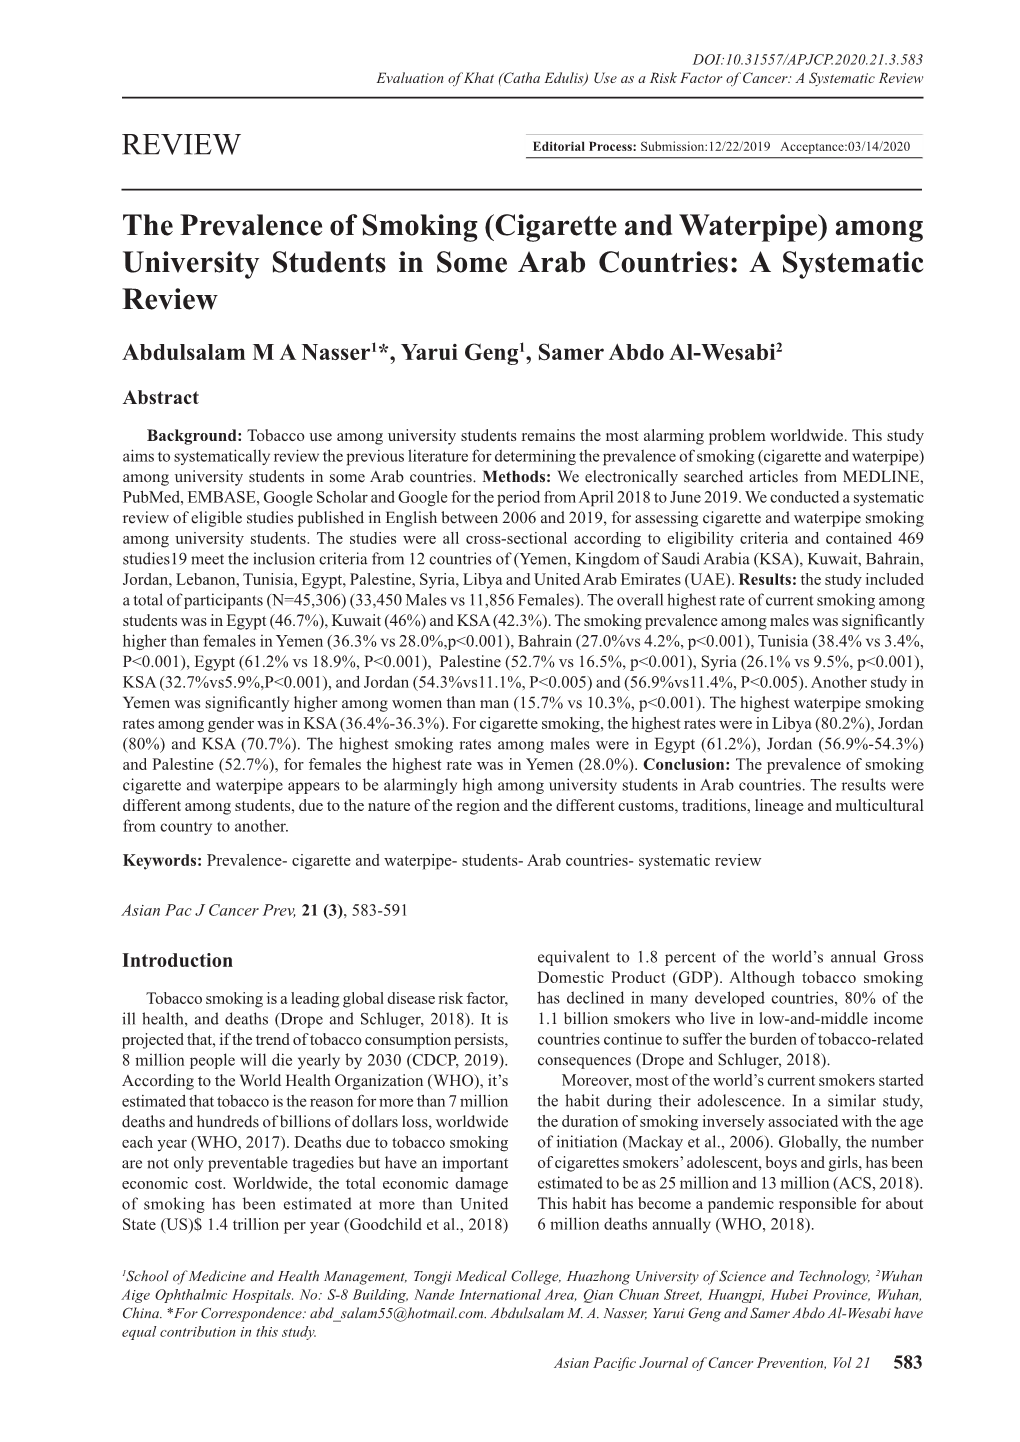 Among University Students in Some Arab Countries: a Systematic Review